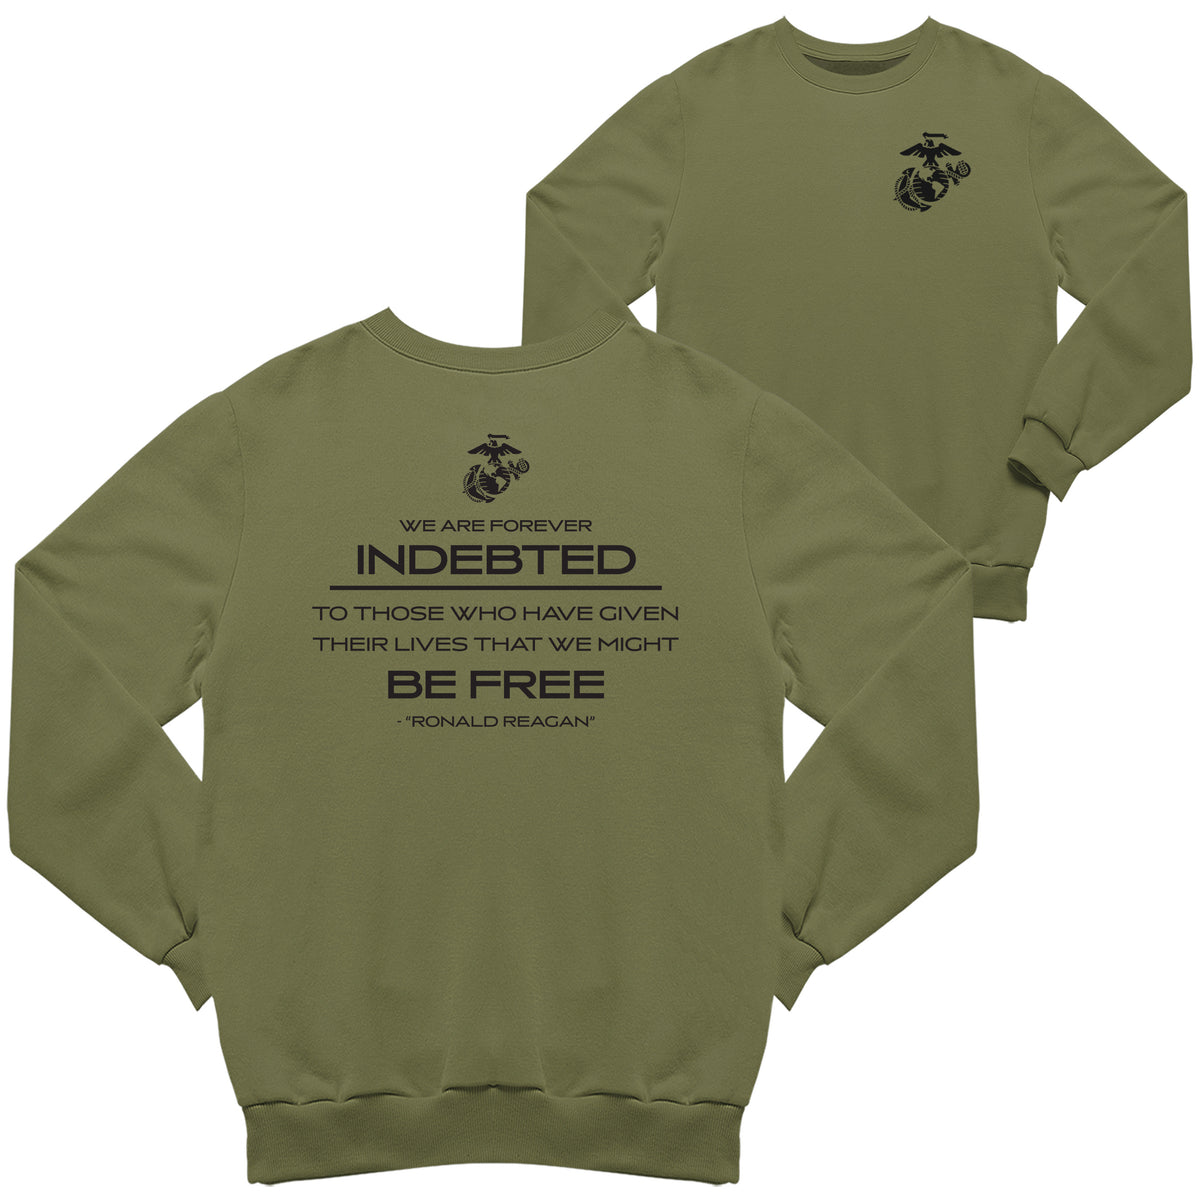 Ronald Reagan Indebted Quote 2-Sided Sweatshirt